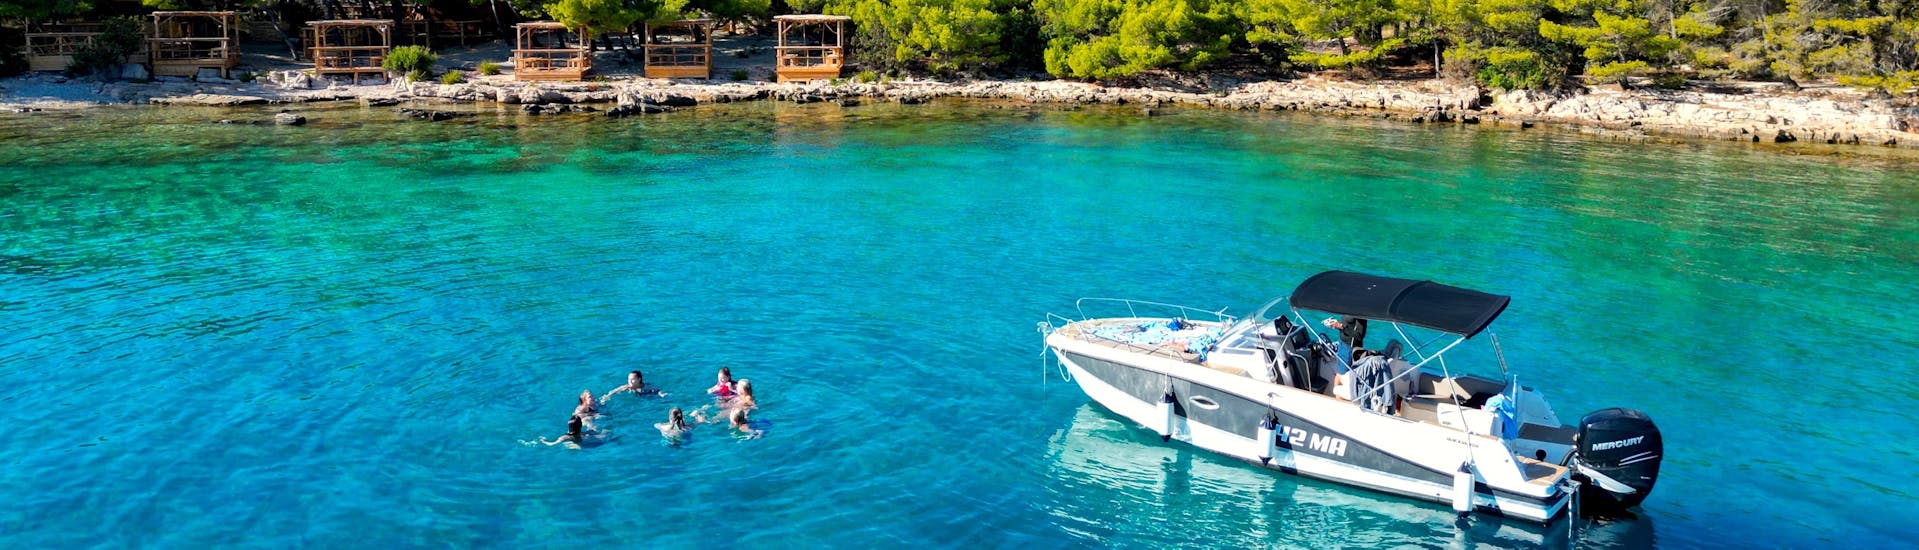 Boat Trip to North Shore of Hvar Island with snorkeling stops.